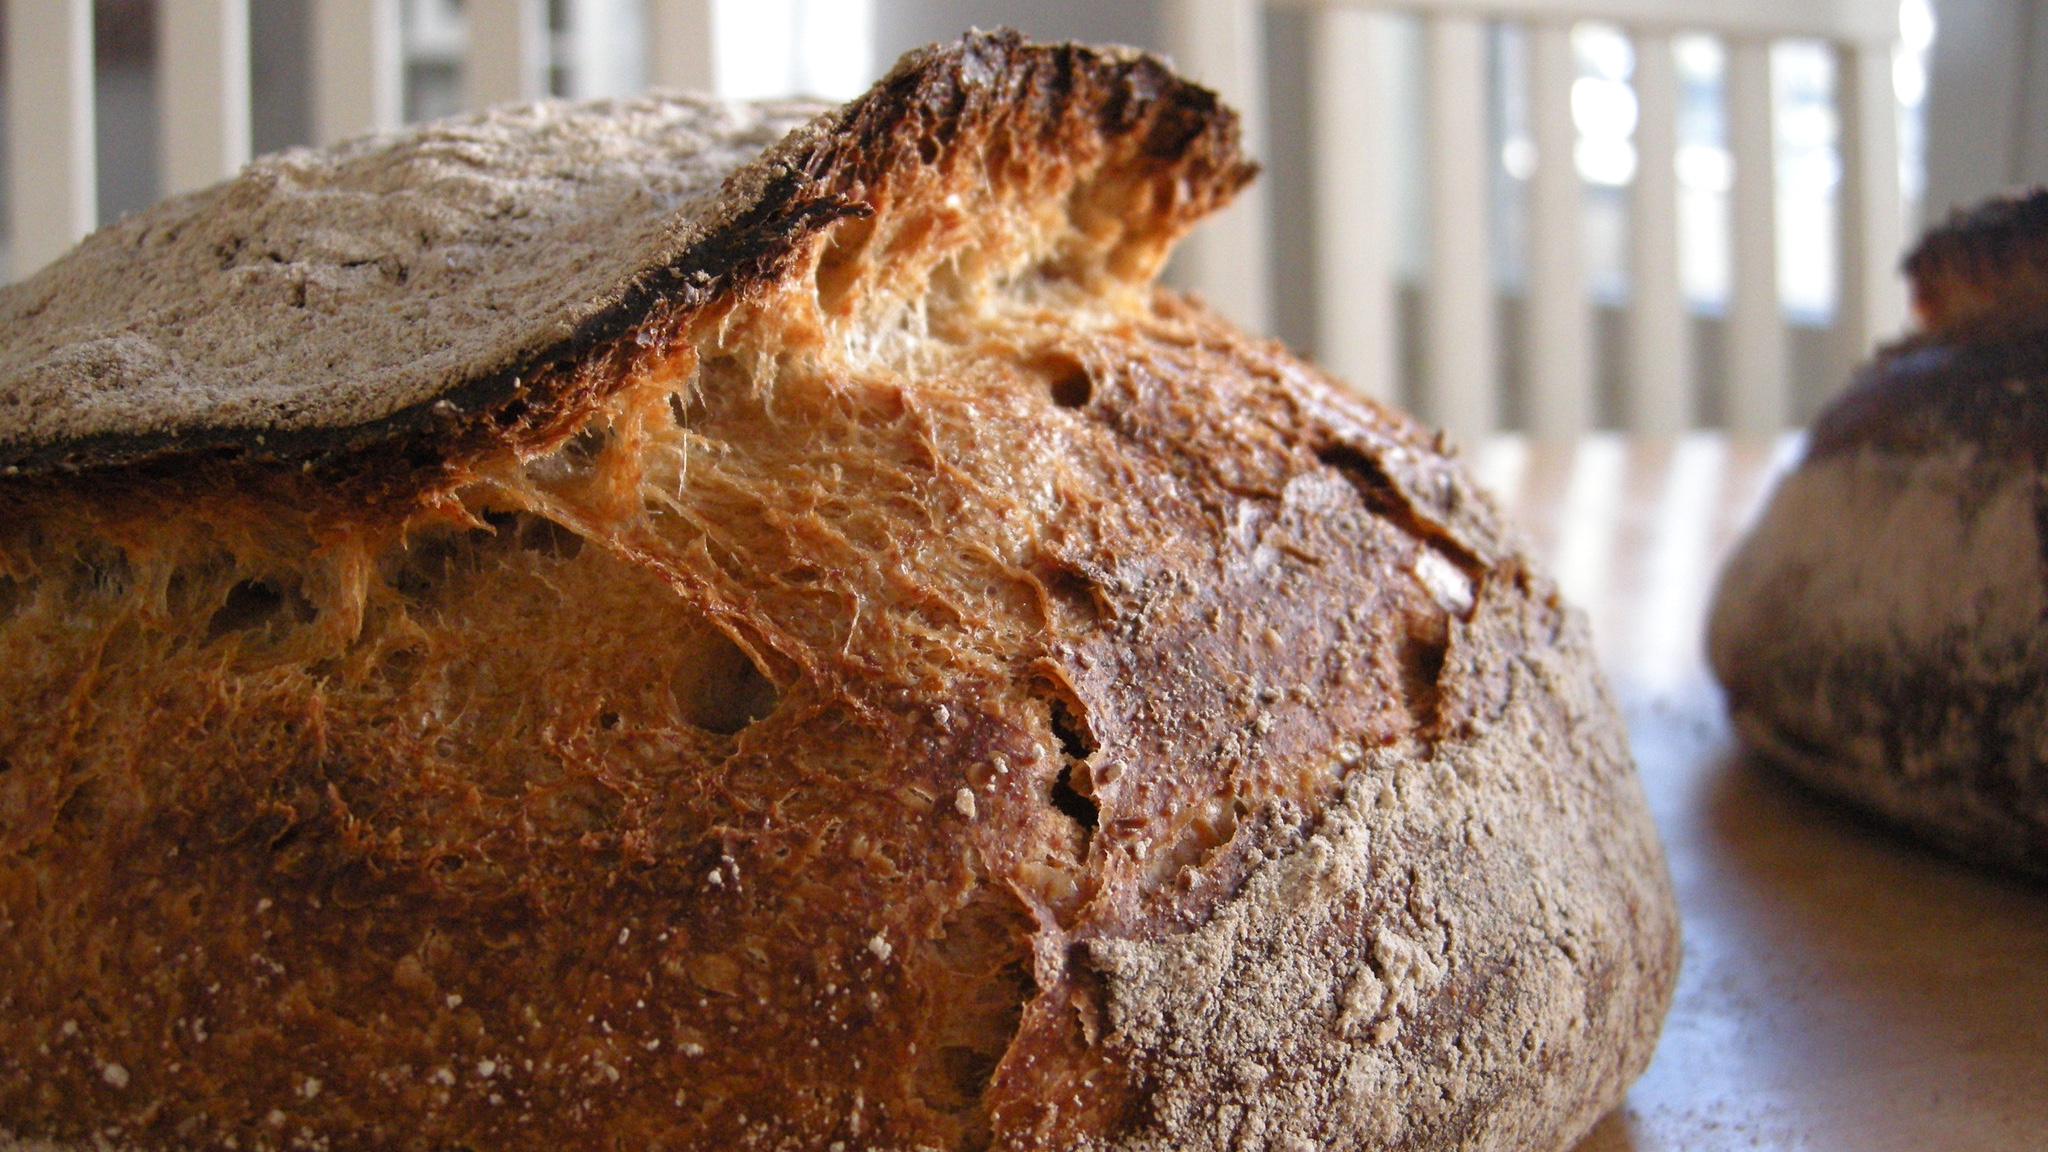 Sourdough bread, the perfect comfort food and time-consuming hobby for these times. (Jarkko Laine / Flickr)